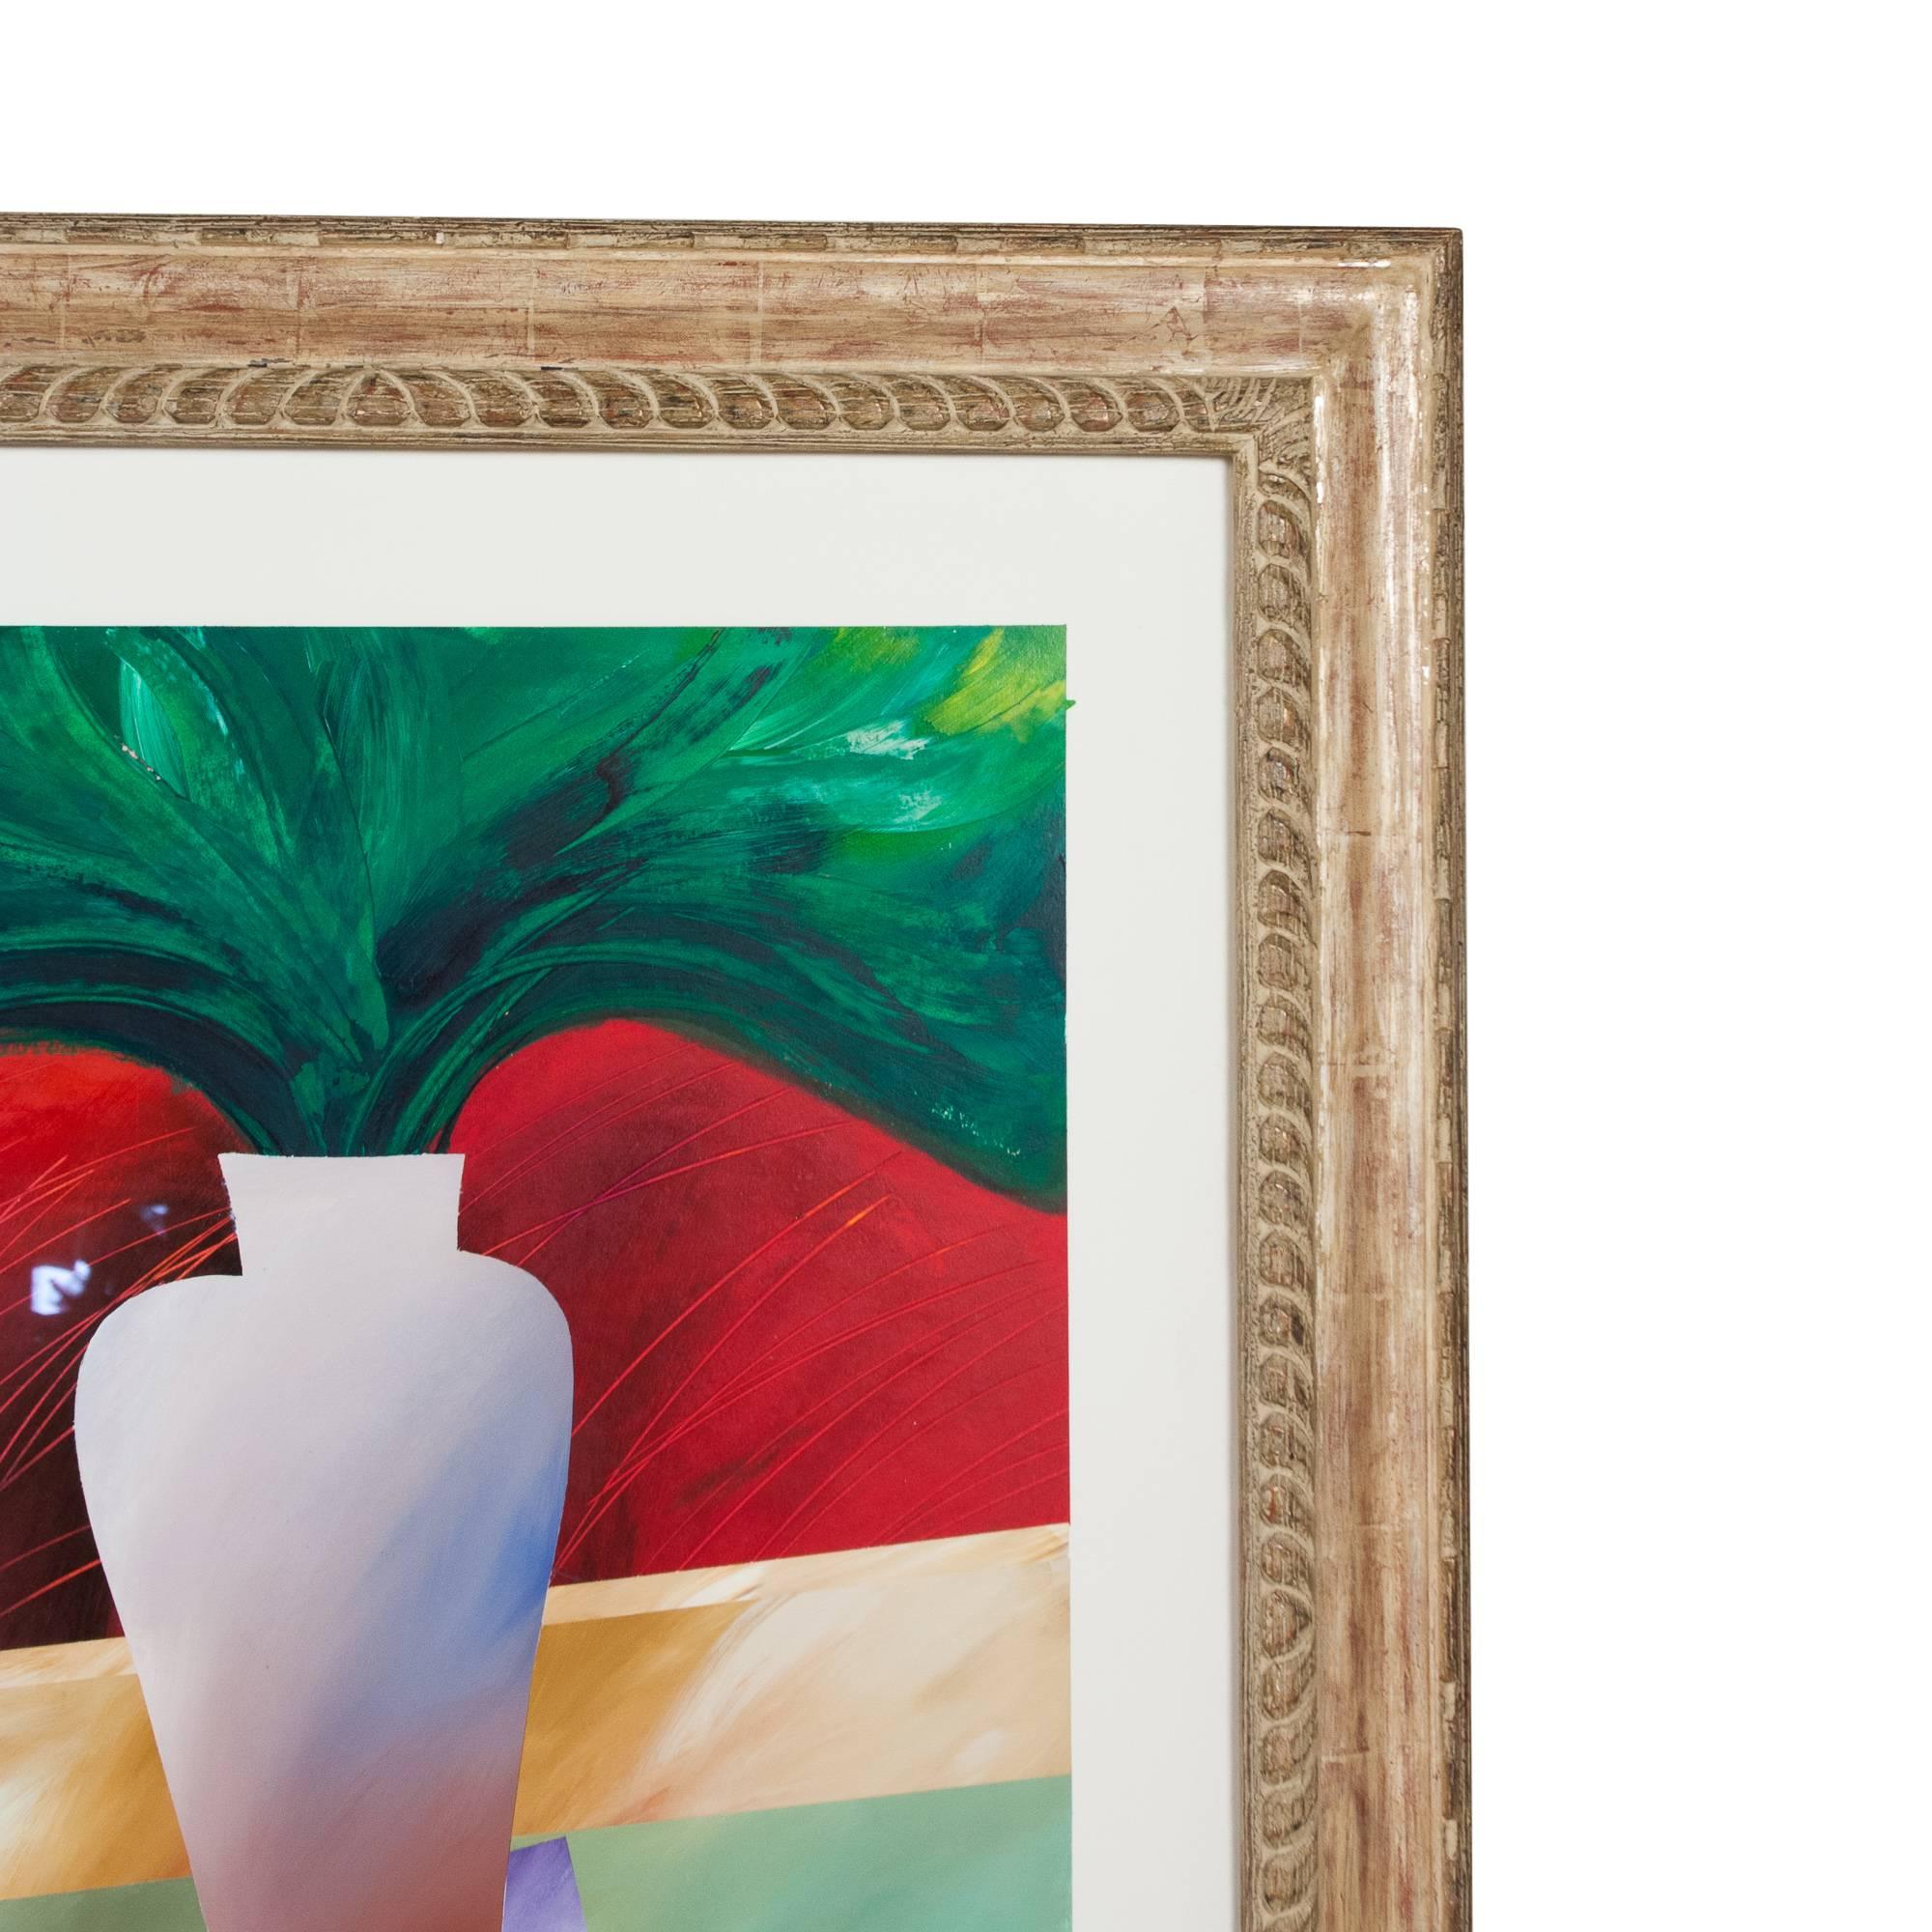 Acrylic on paper still life, "Vessel with Greenery", in carved oak frame, by Michael Ledet (b. 1941), American 1988. Titled lower left in pencil. Signed and dated in pencil lower right. Frame dimensions 45 x 35 in. Art dimensions 37 1/2 x